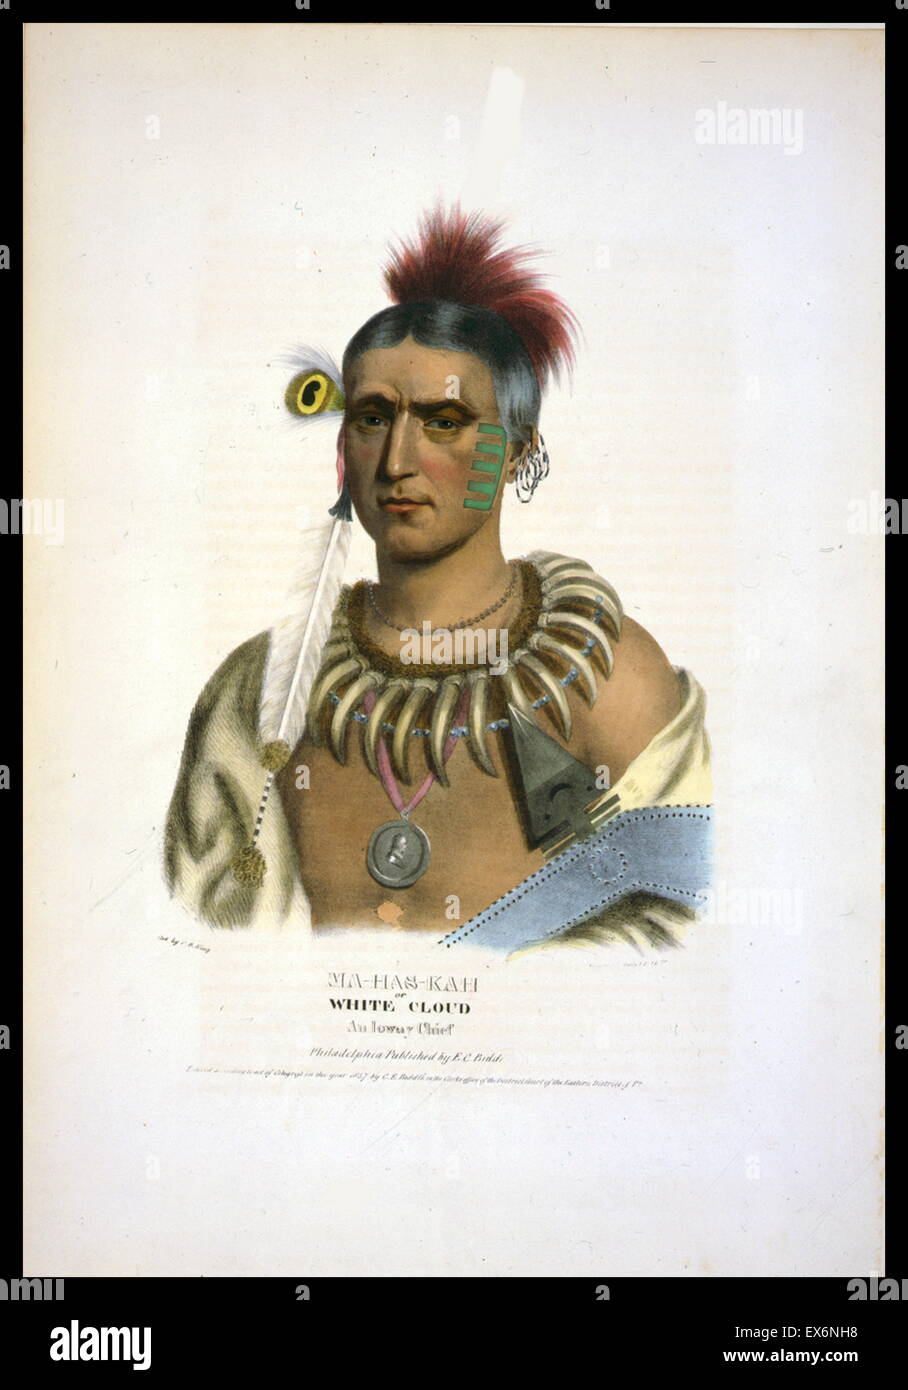 Ma-Has-Kah or White Cloud, an Ioway chief, wearing a claw necklace, a portrait medallion on his neck, earrings and feathers. The Ioway (Iowa) are a Native American Siouan people who live either in Kansas and Nebraska or Oklahoma. Stock Photo